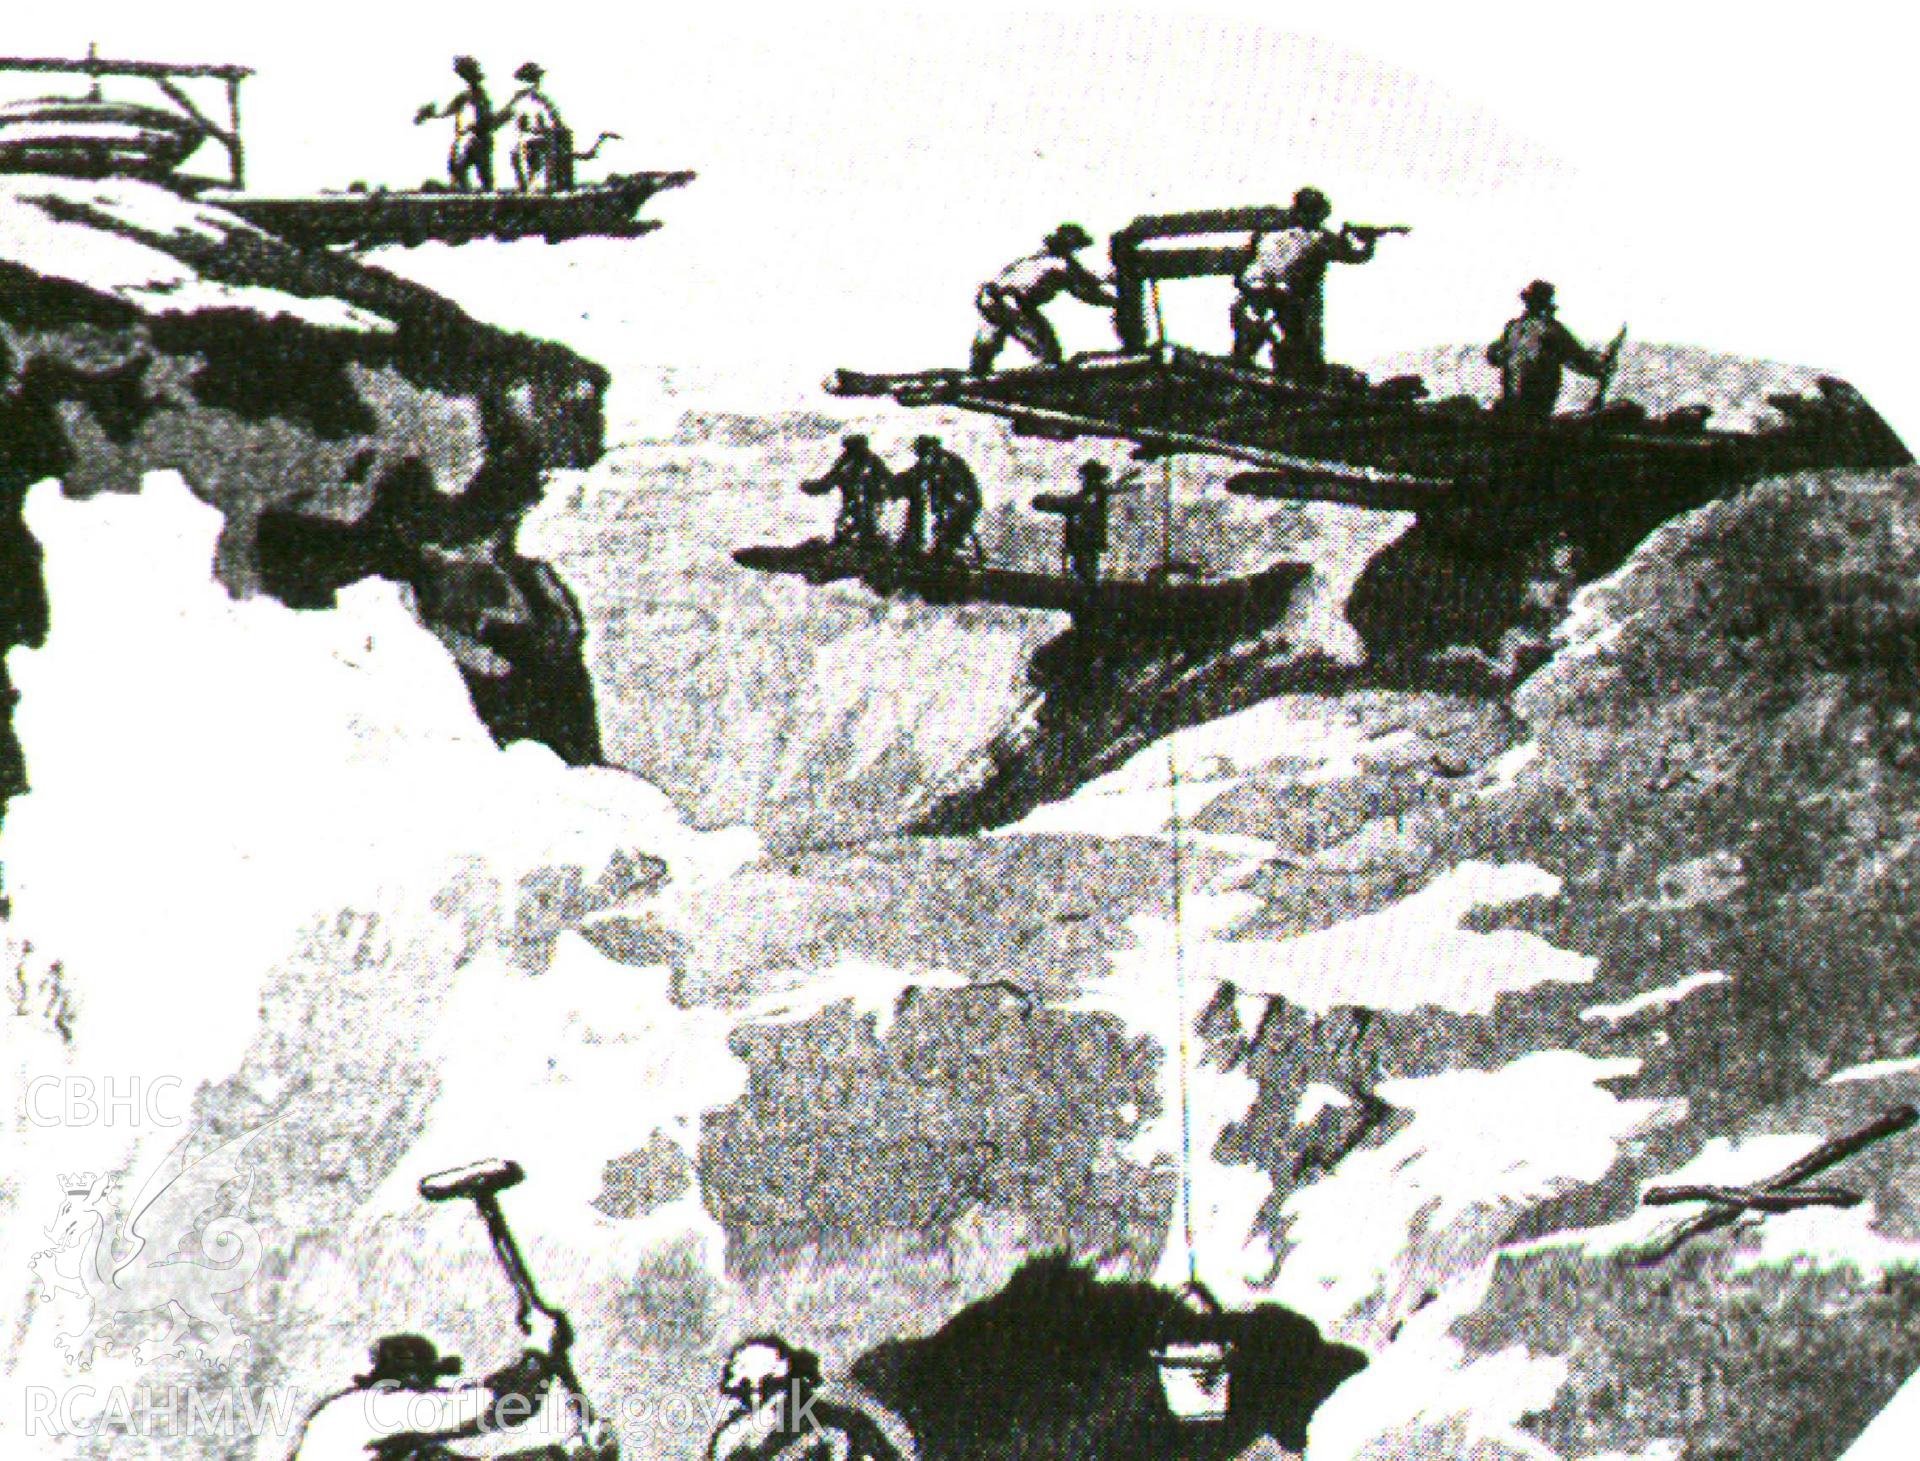 Digital image of illustration of whimsy stages on the edge of the Parys Mine opencast in a painting by JC Ibbetson from 1795 - Williams, 1980